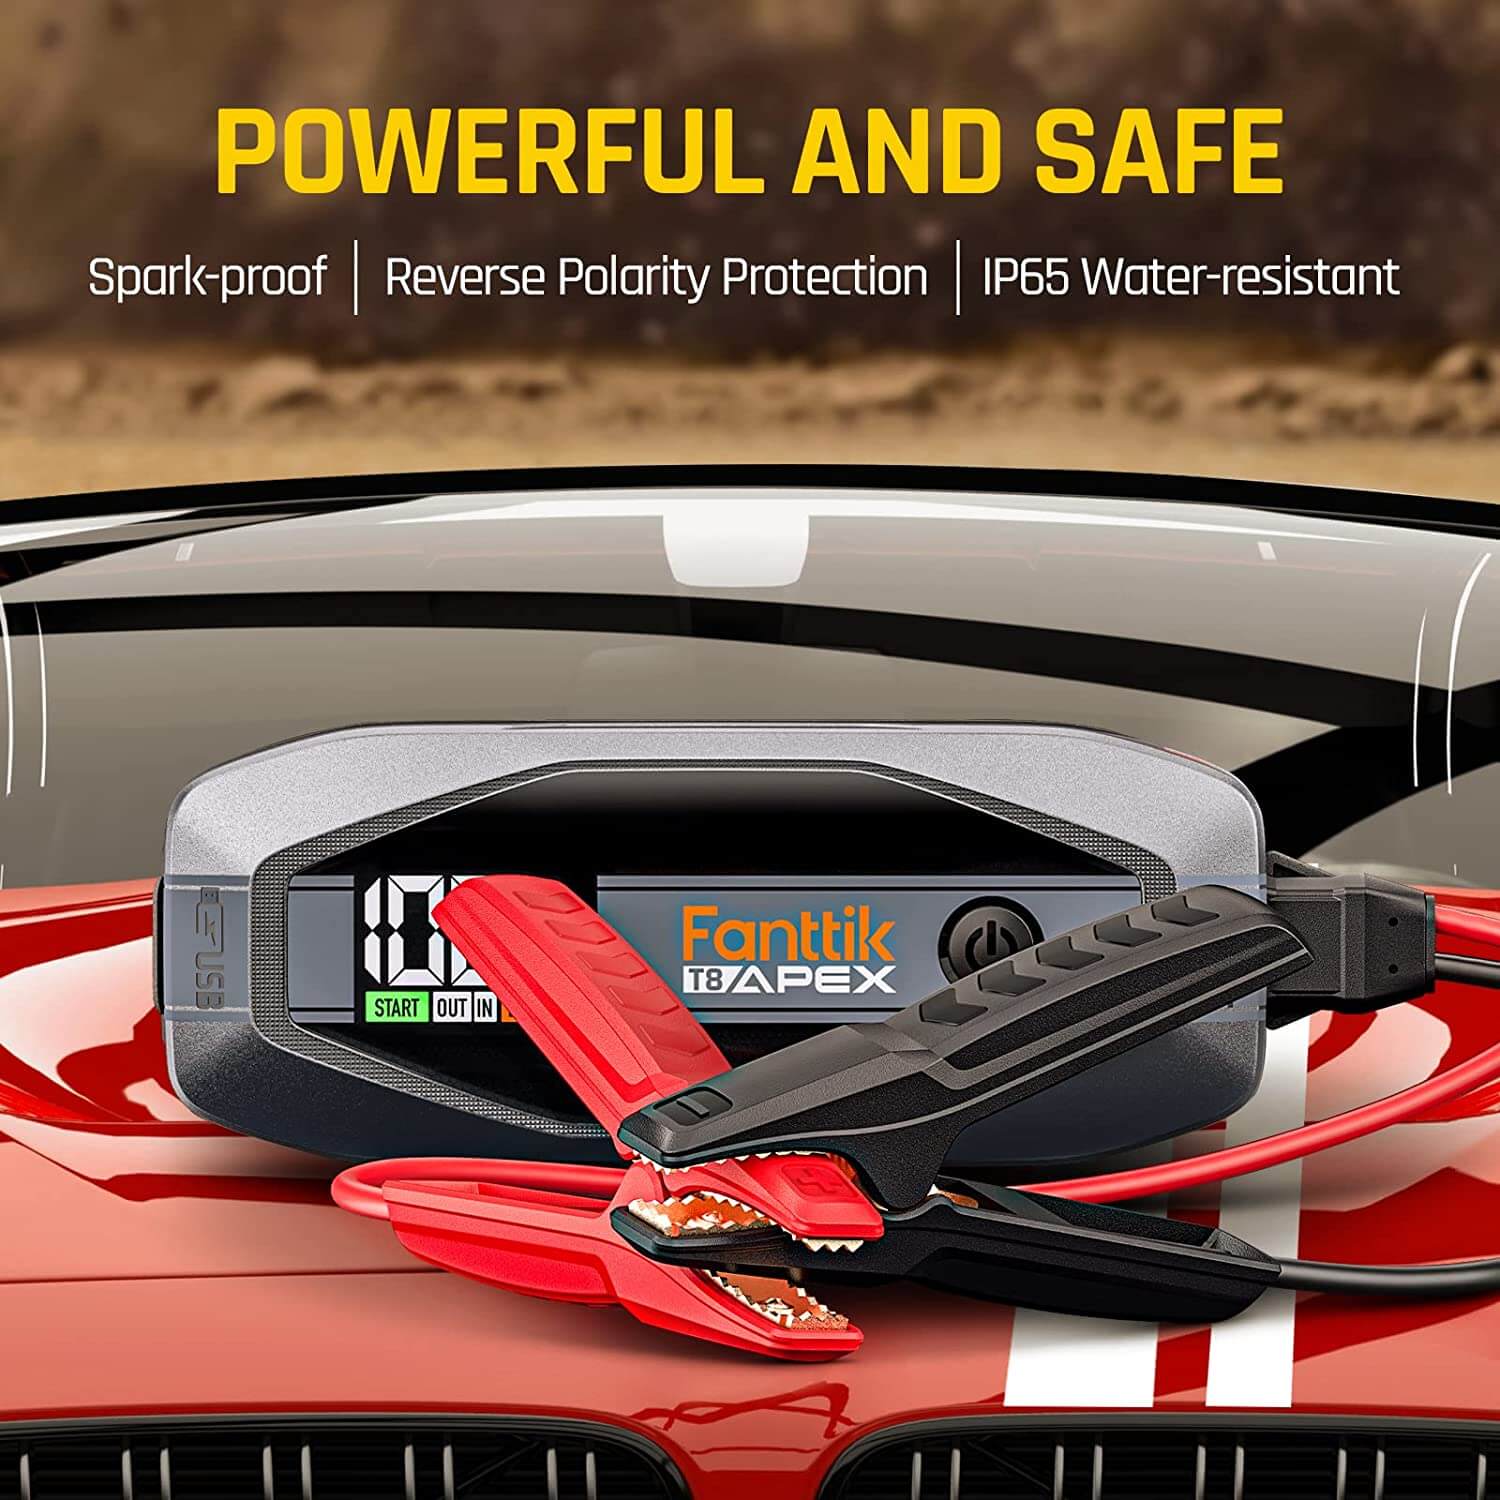 AVAPOW 2000A Car Jump Starter Powerful Car Jump Starter with USB Quick  Charge